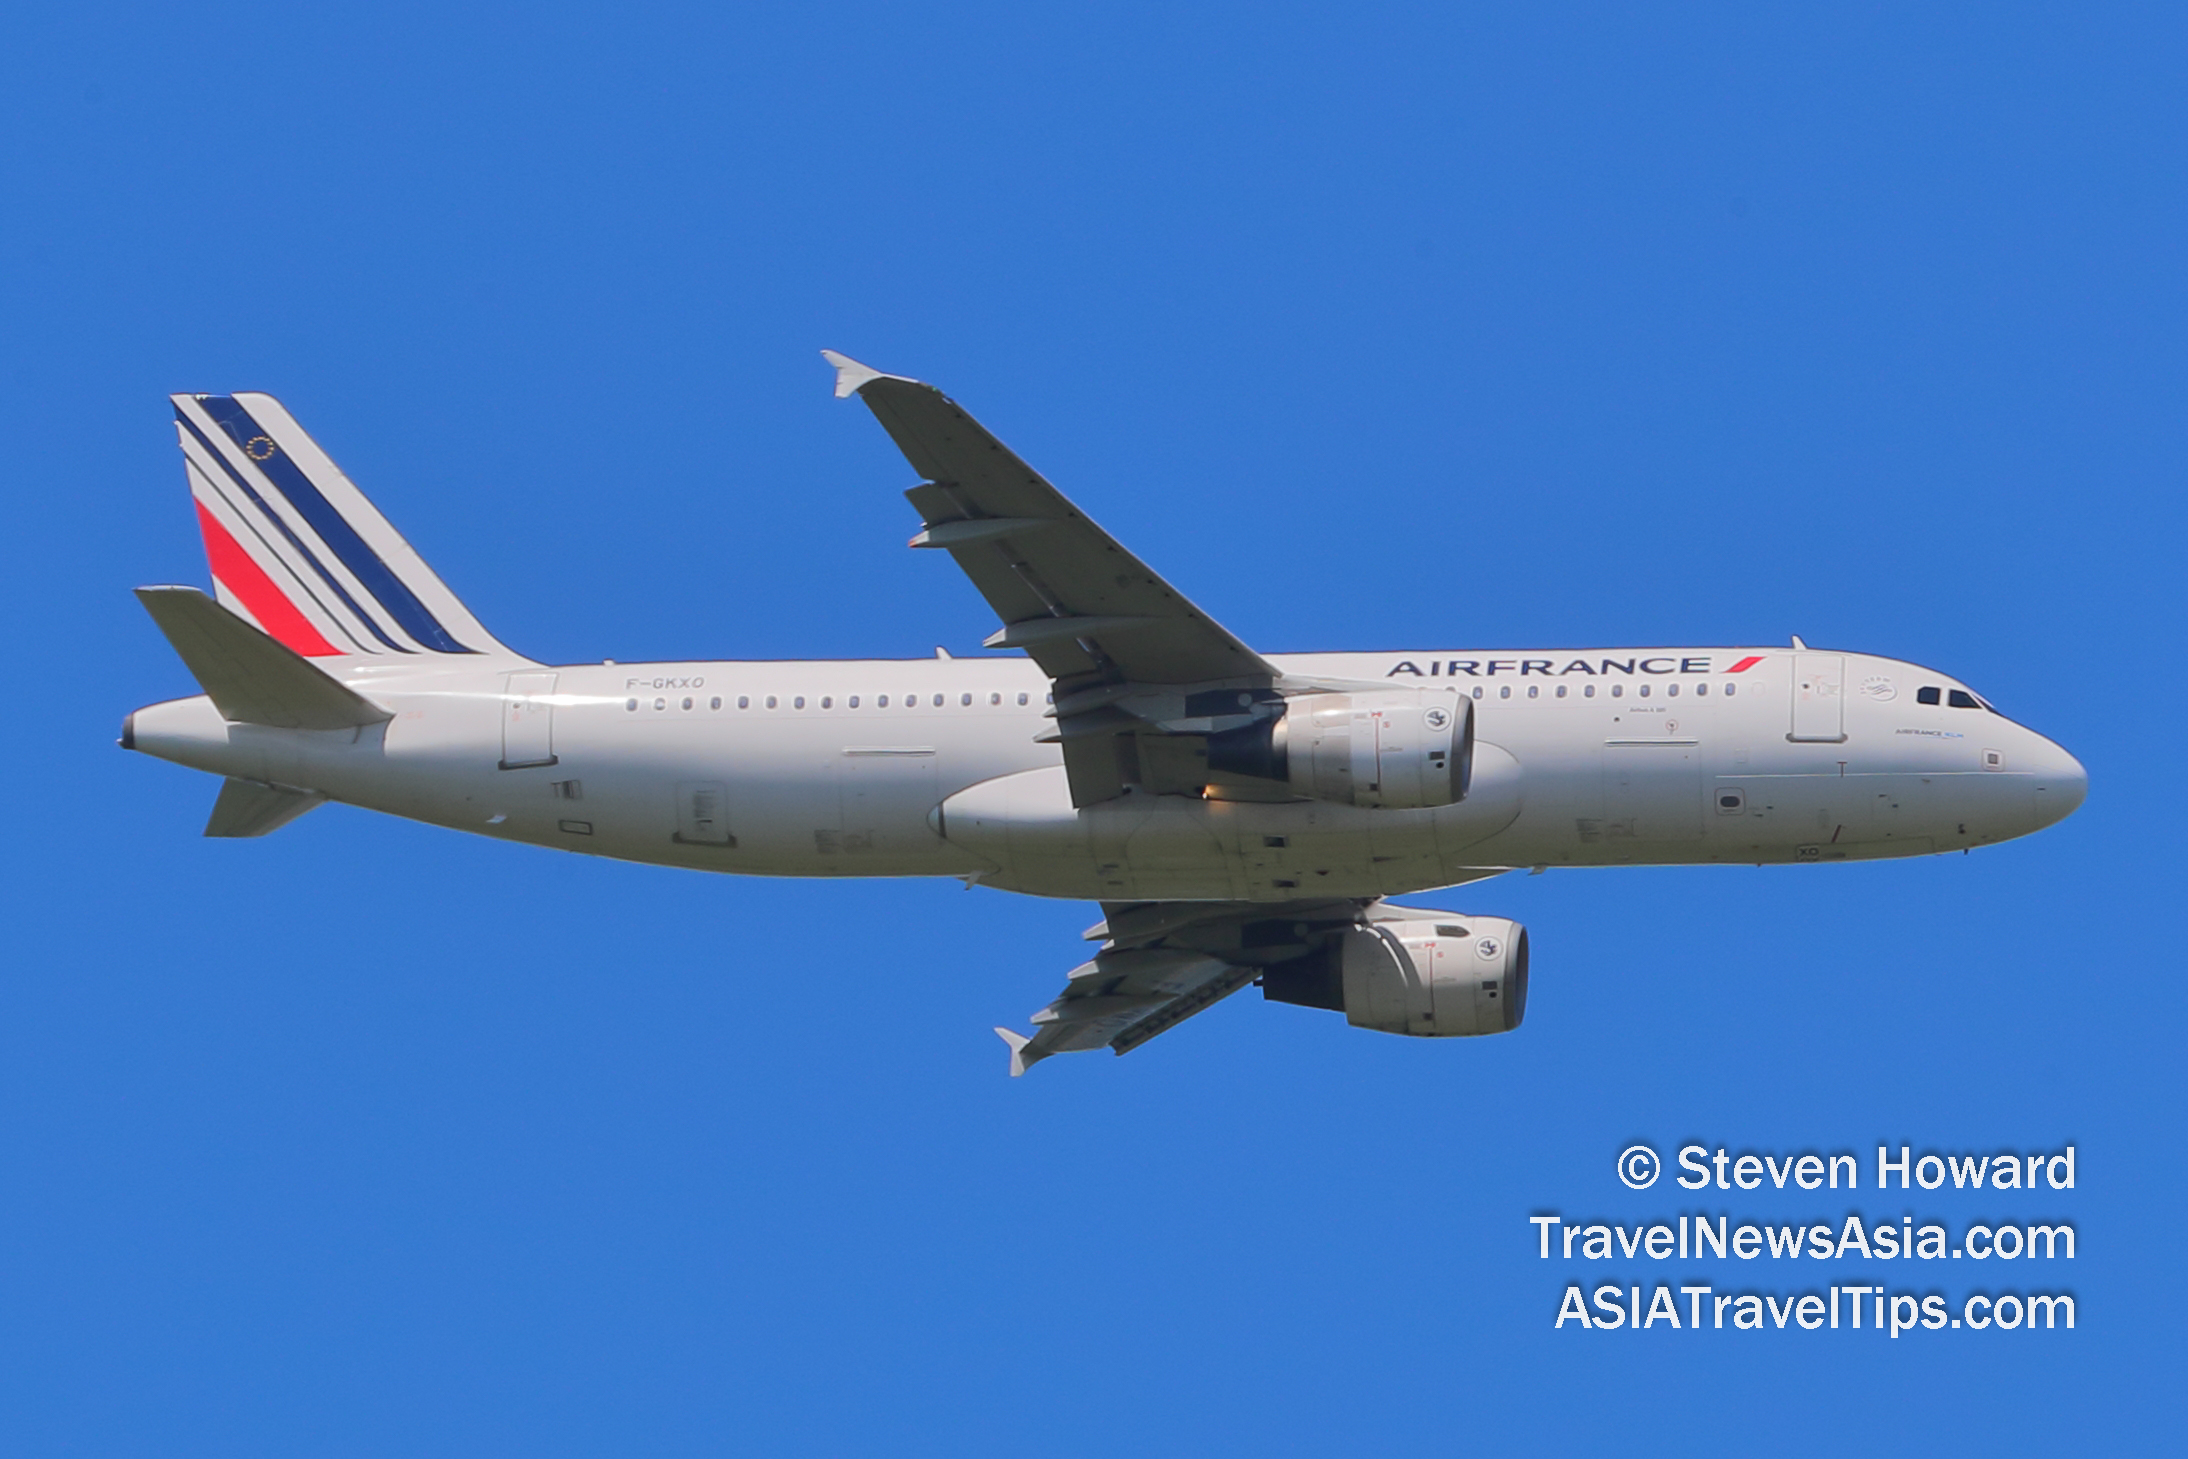 Air France Airbus A320 reg: F-GKXO. Picture by Steven Howard of TravelNewsAsia.com on 3 July 2019. Click to enlarge.